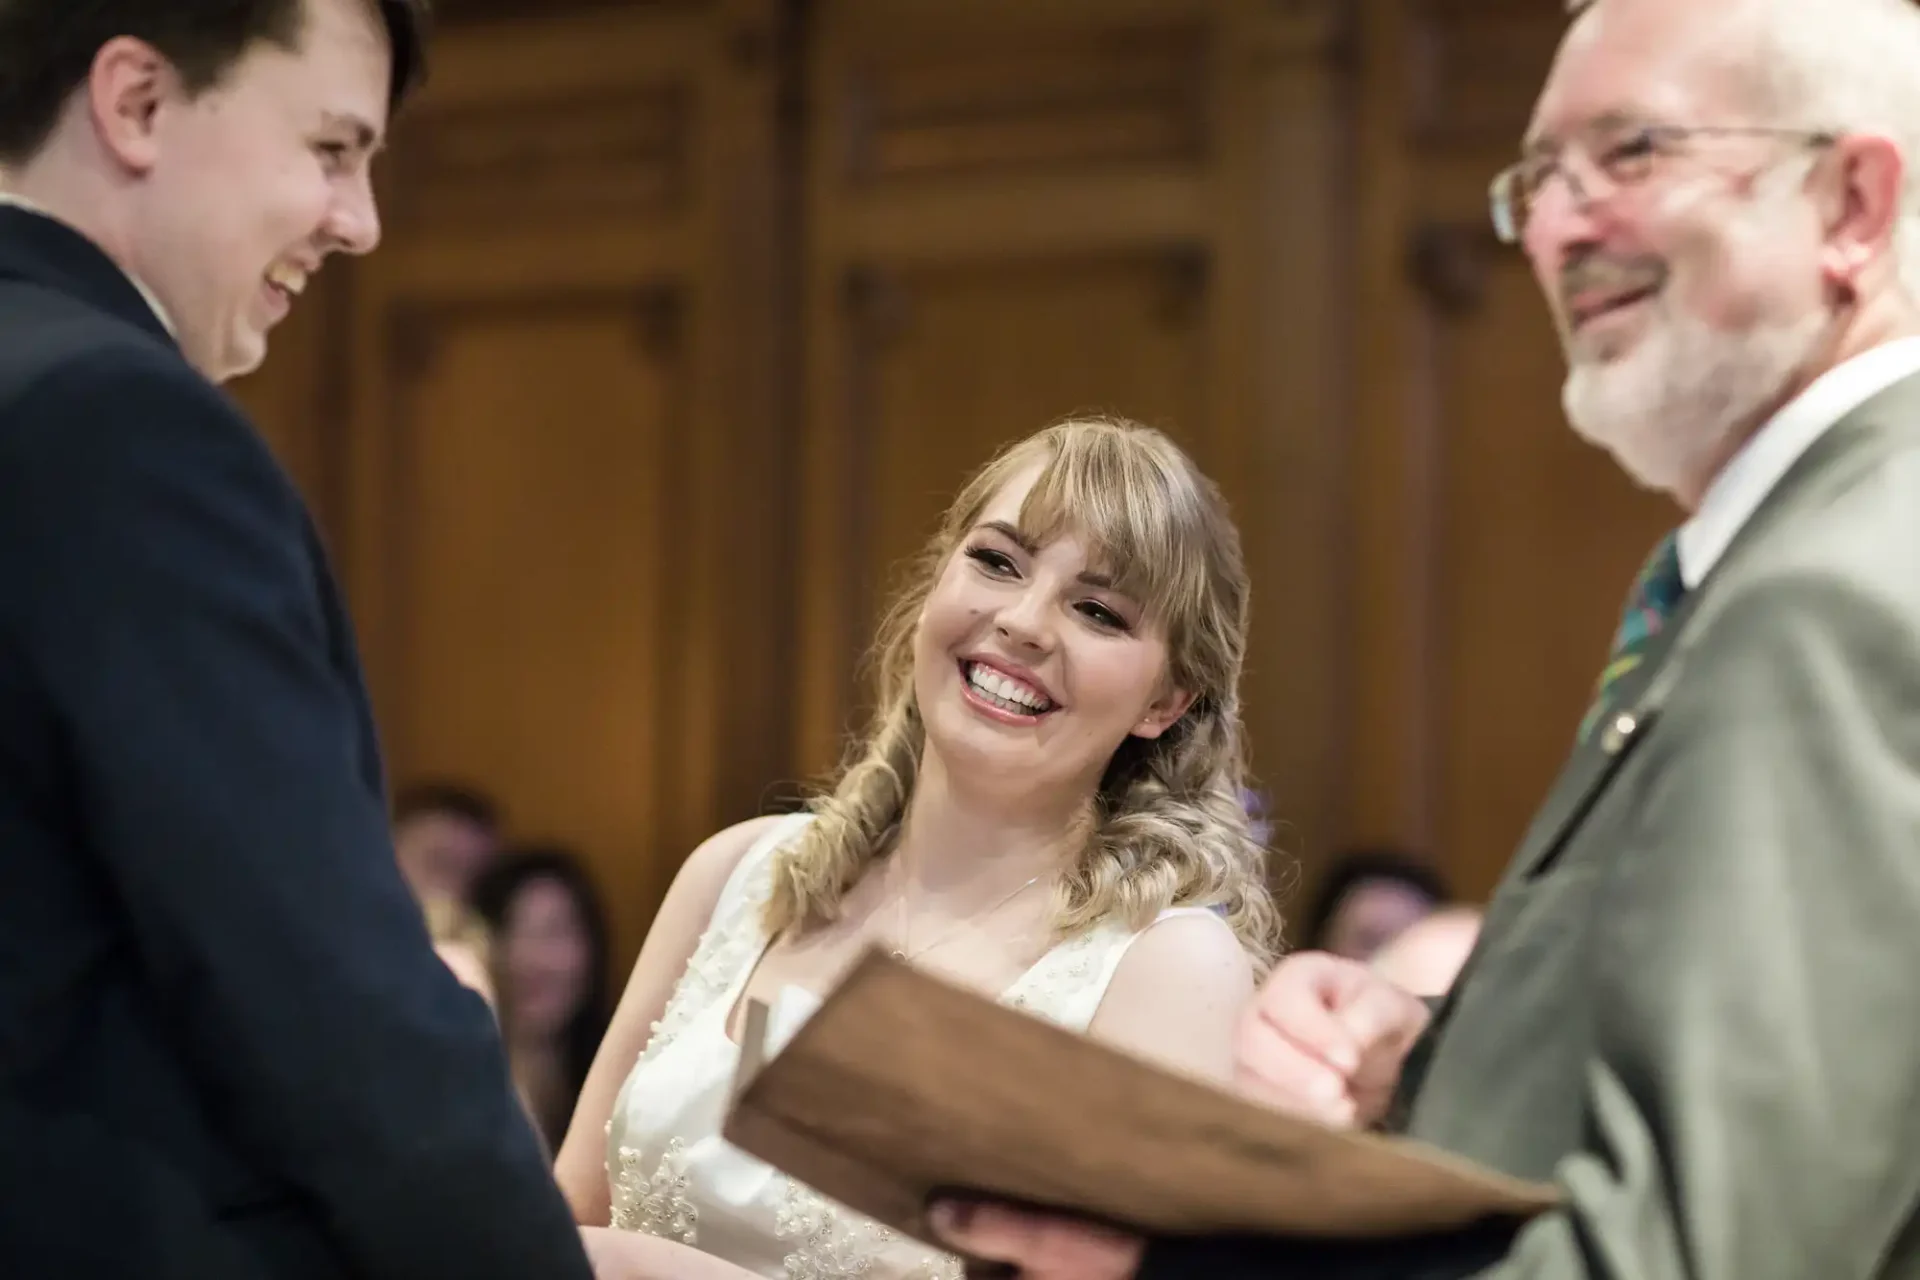 Bride and groom smiling at each other during their wedding ceremony, with an officiant holding a book in the foreground.